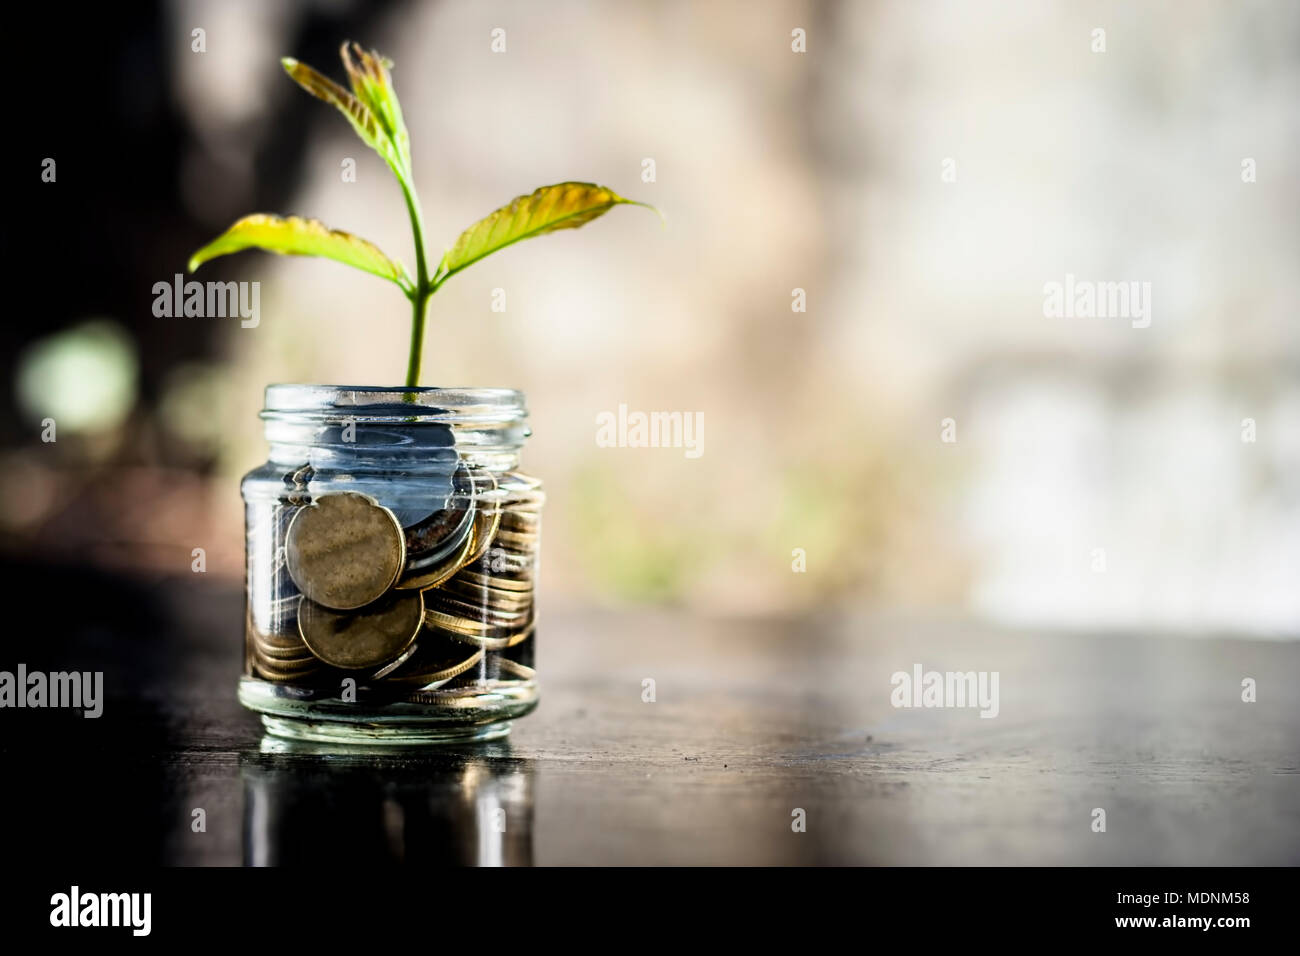 A glass jar full of coins and plant growing through it.  Concept of savings, interest,  fixed deposits, pension,  social security cheque. Stock Photo